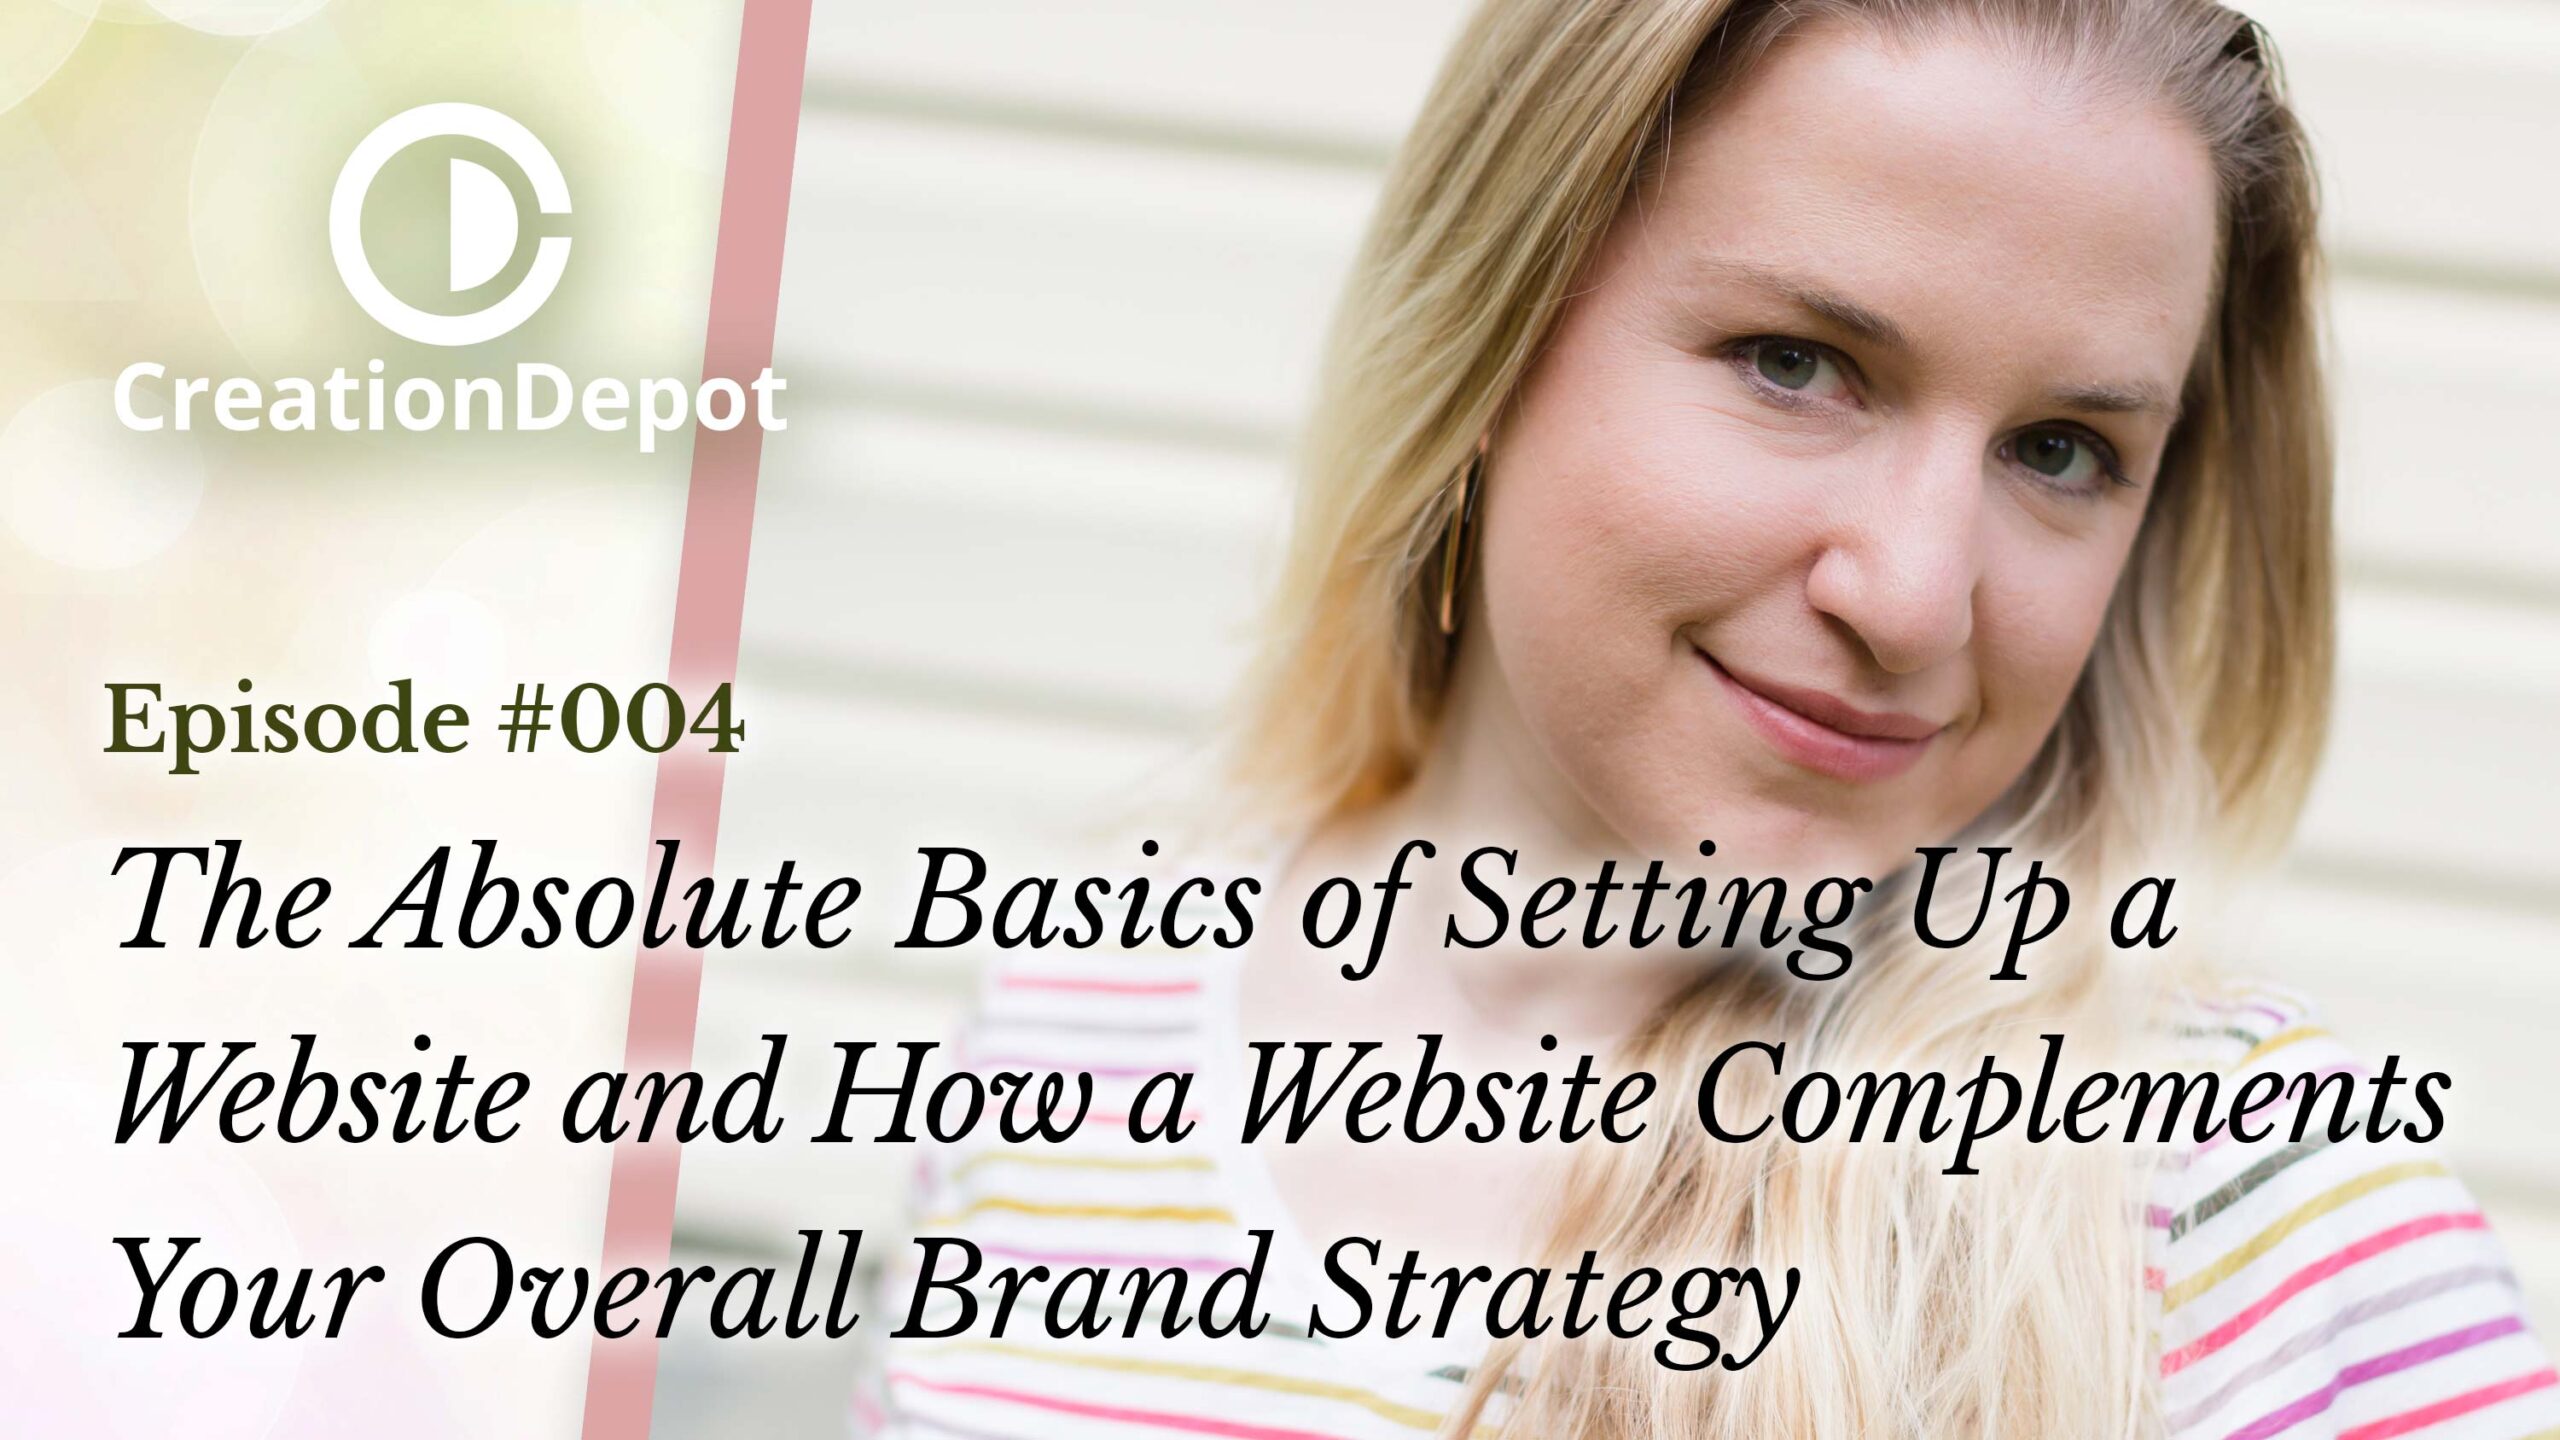 Podcast episode cover art of Wendy Litteral for the CreationDepot podcast episode #4 on The Absolute Basics of Setting Up a Website and How a Website Complements Your Overall Brand Strategy